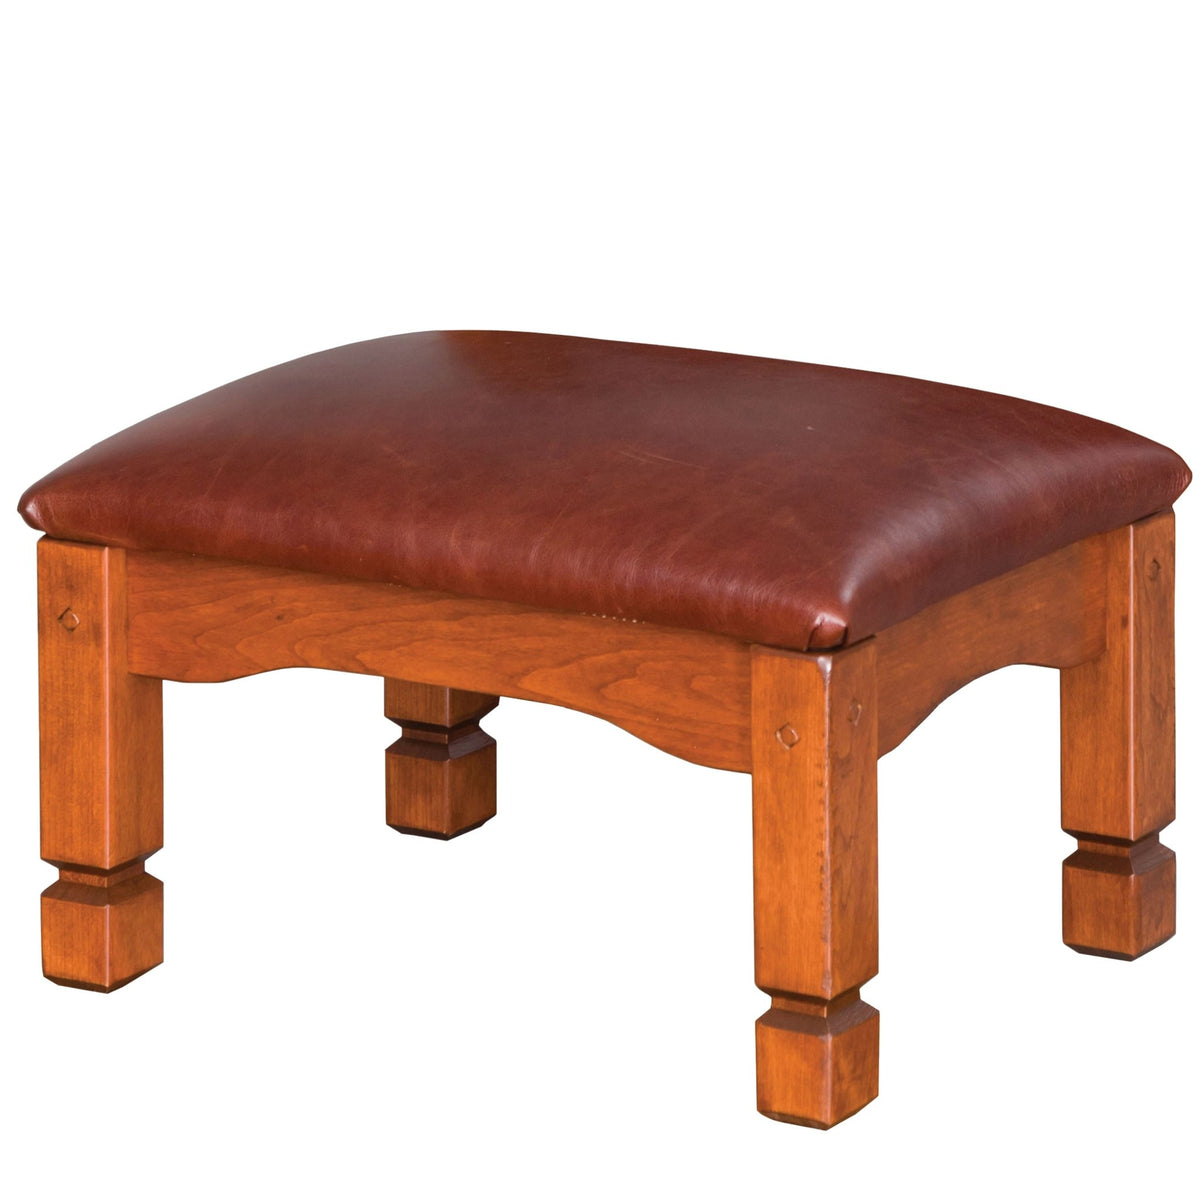 Rustic Country Ottoman - snyders.furniture